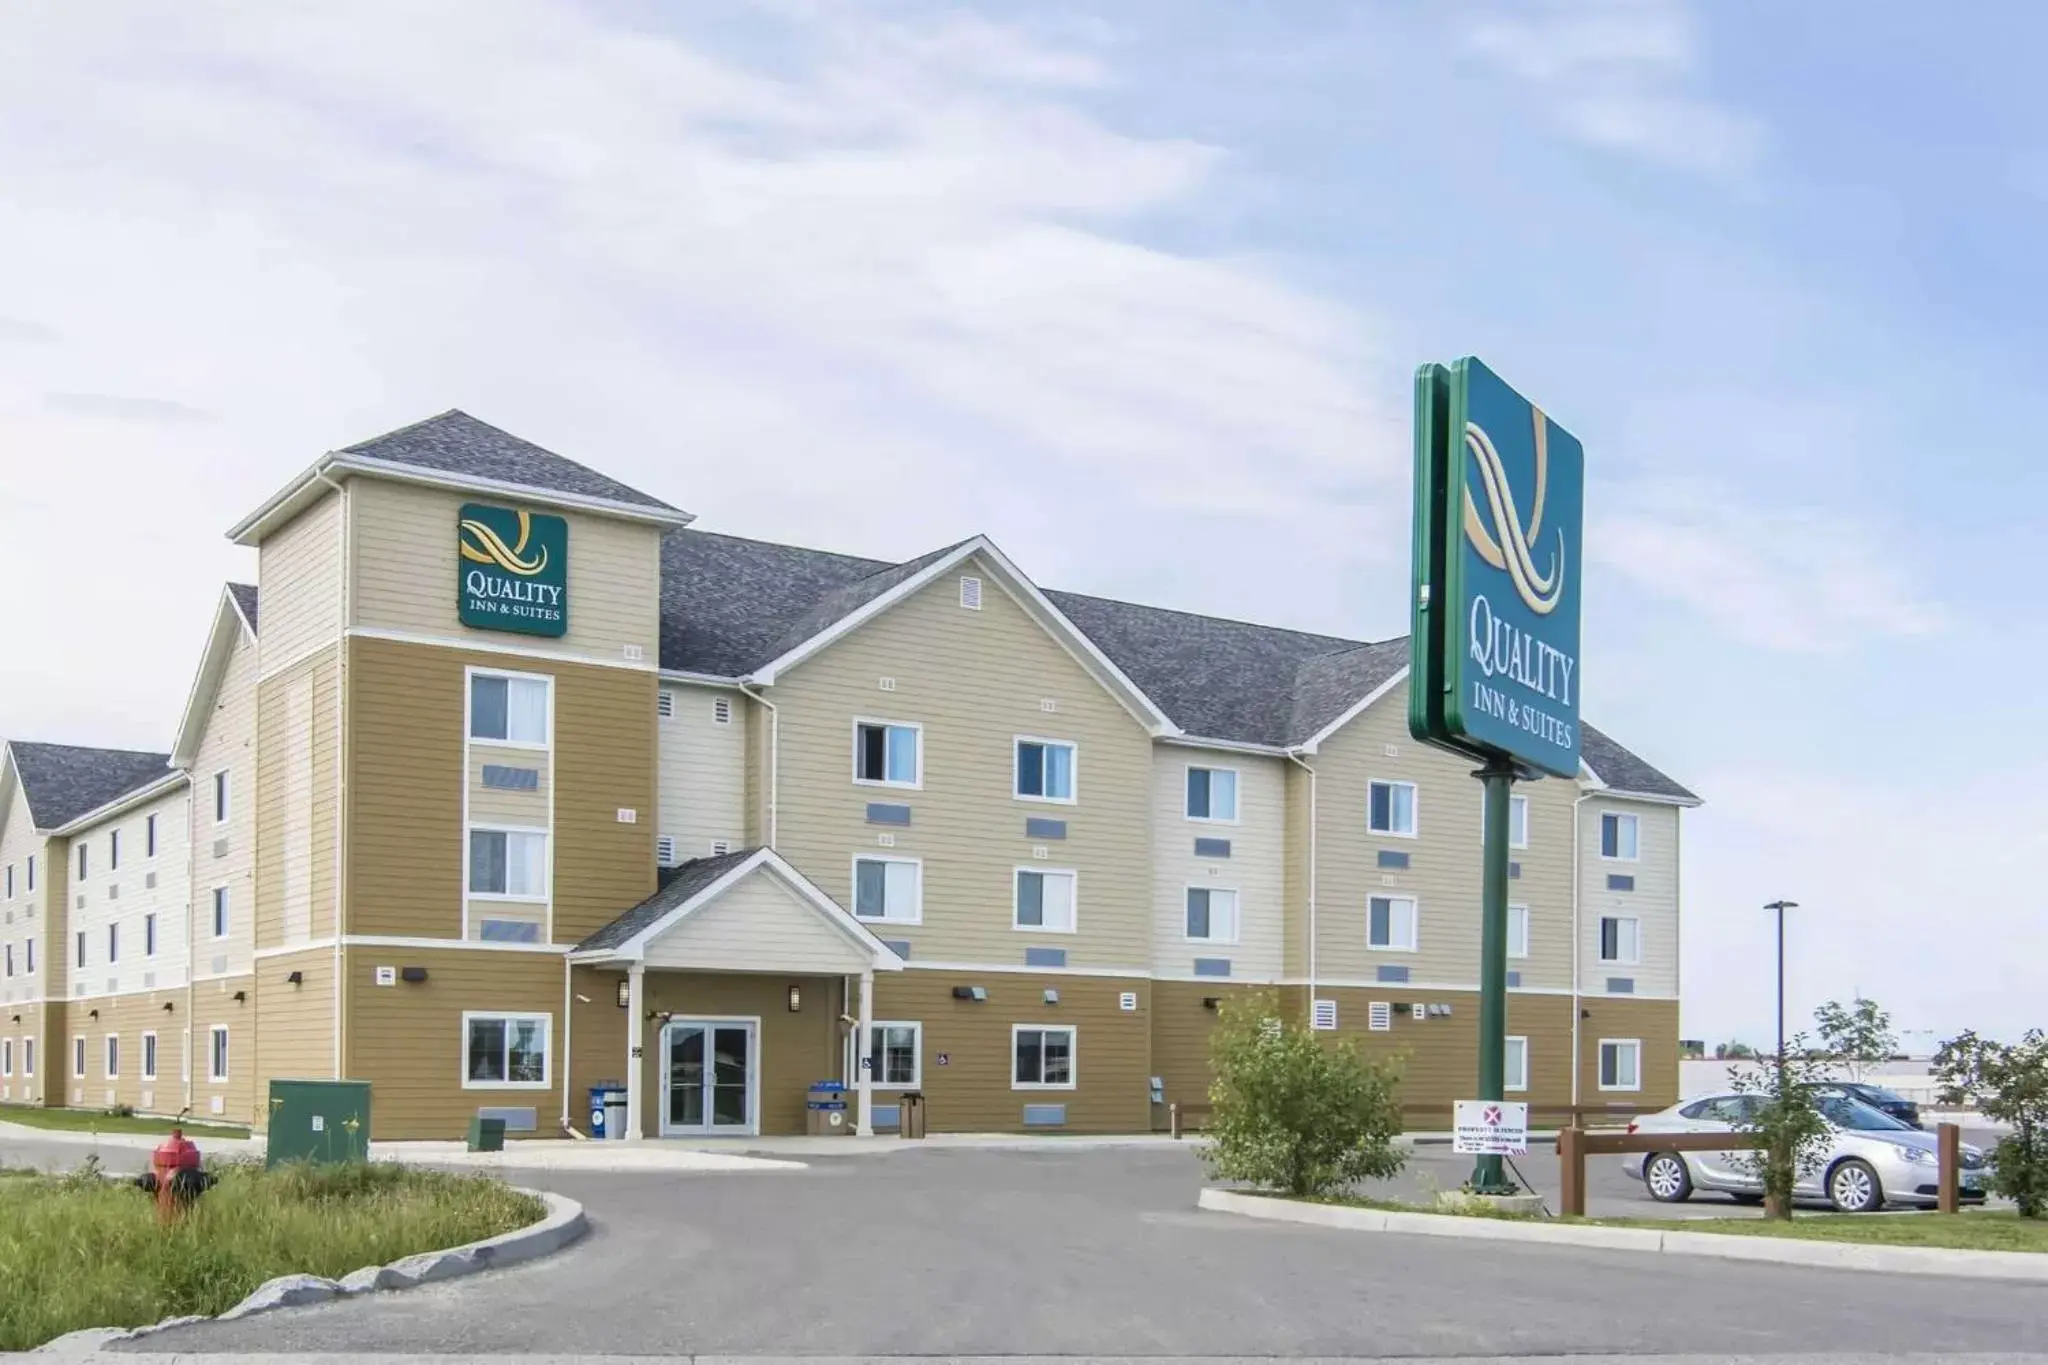 Property Building in Quality Inn & Suites Thompson